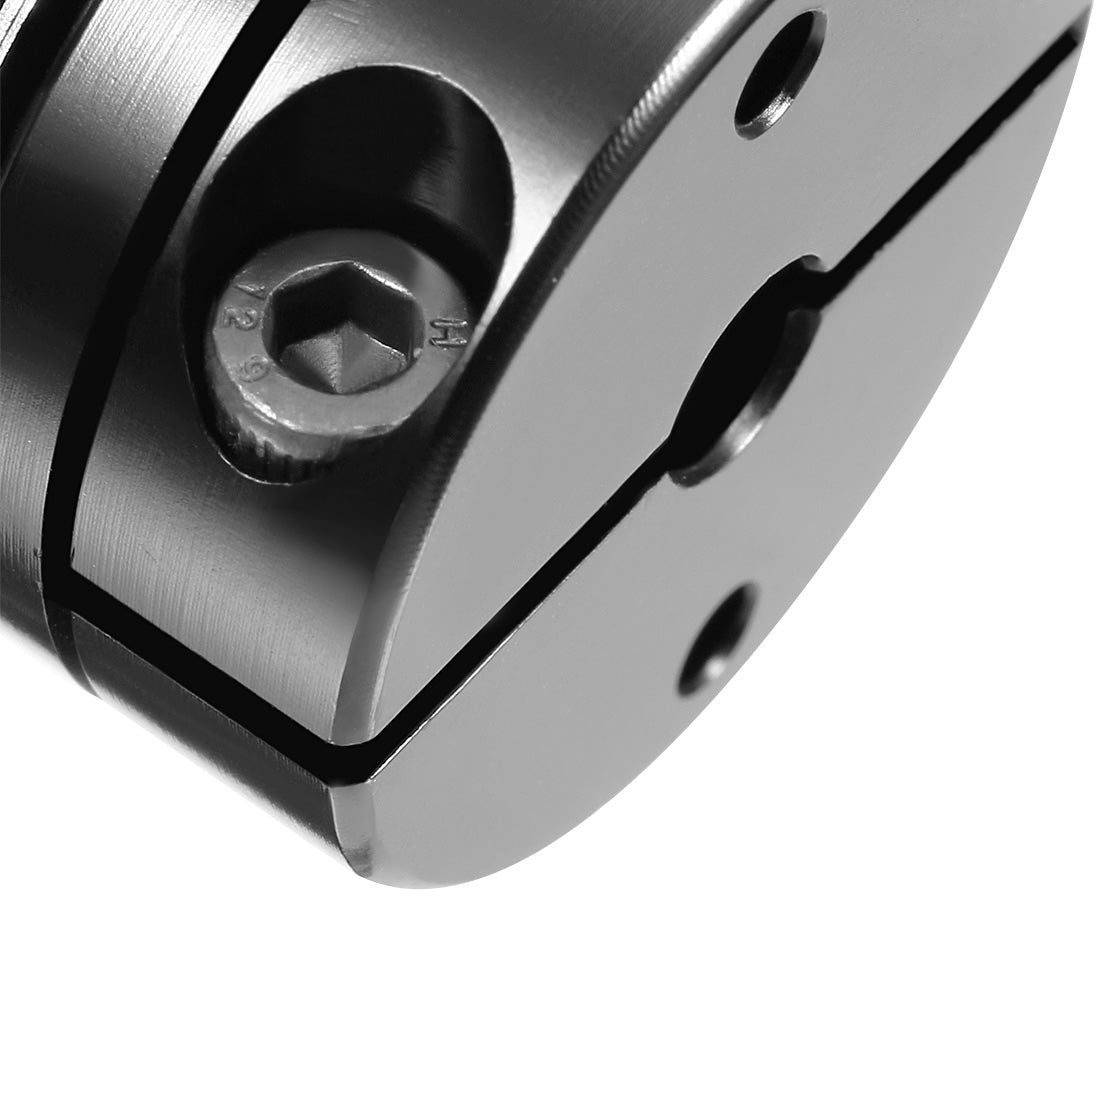 uxcell Uxcell 8mmx8mm Clamp Tight Motor Shaft 2 Diaphragm Coupling Coupler